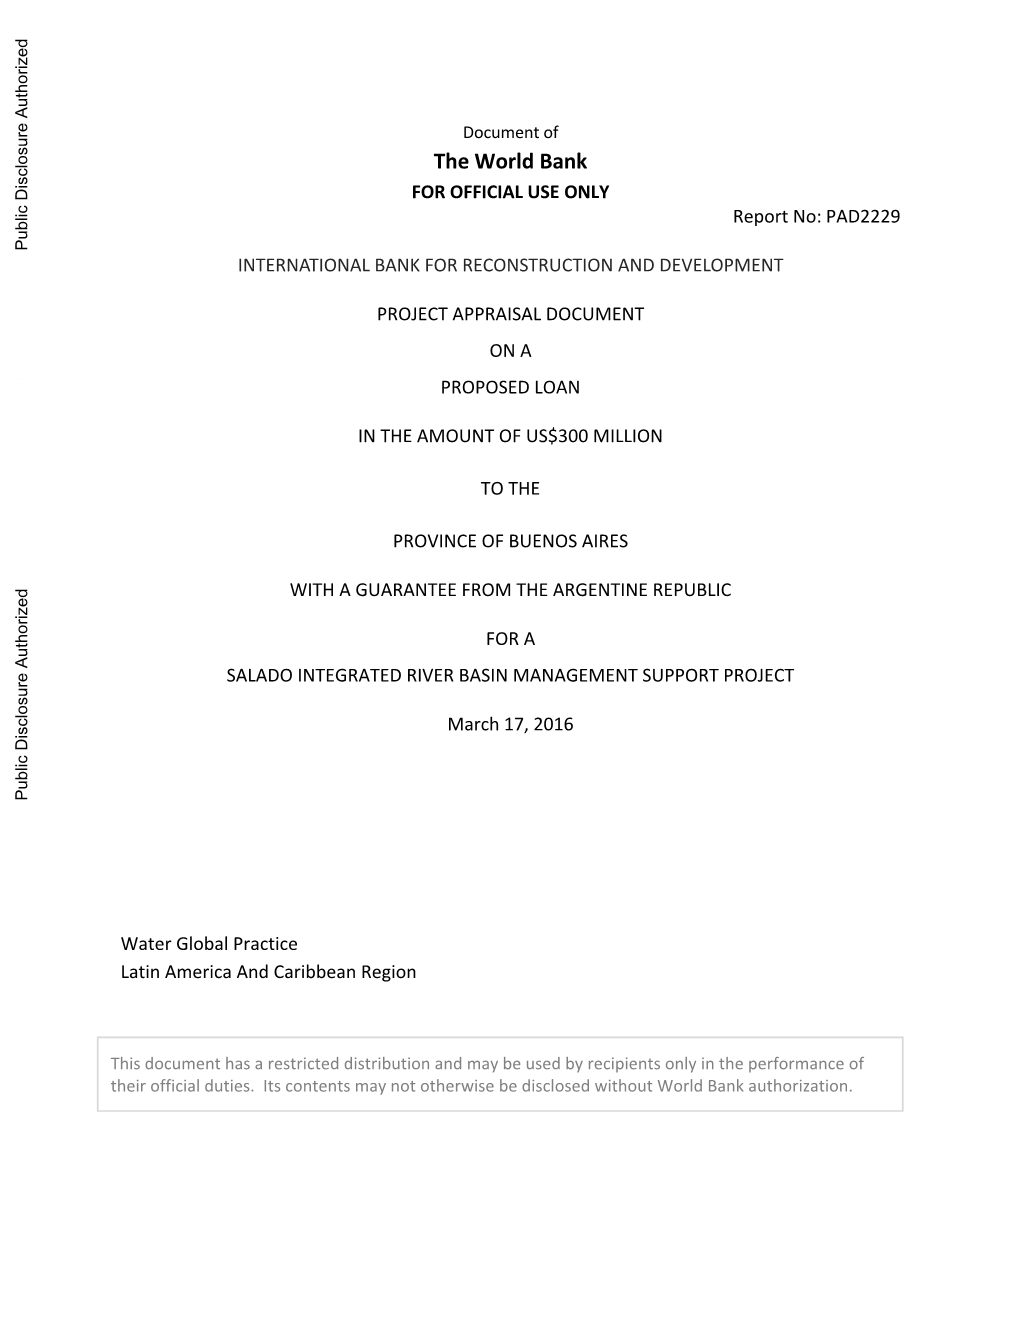 Document of the World Bank for OFFICIAL USE ONLY Report No: PAD2229